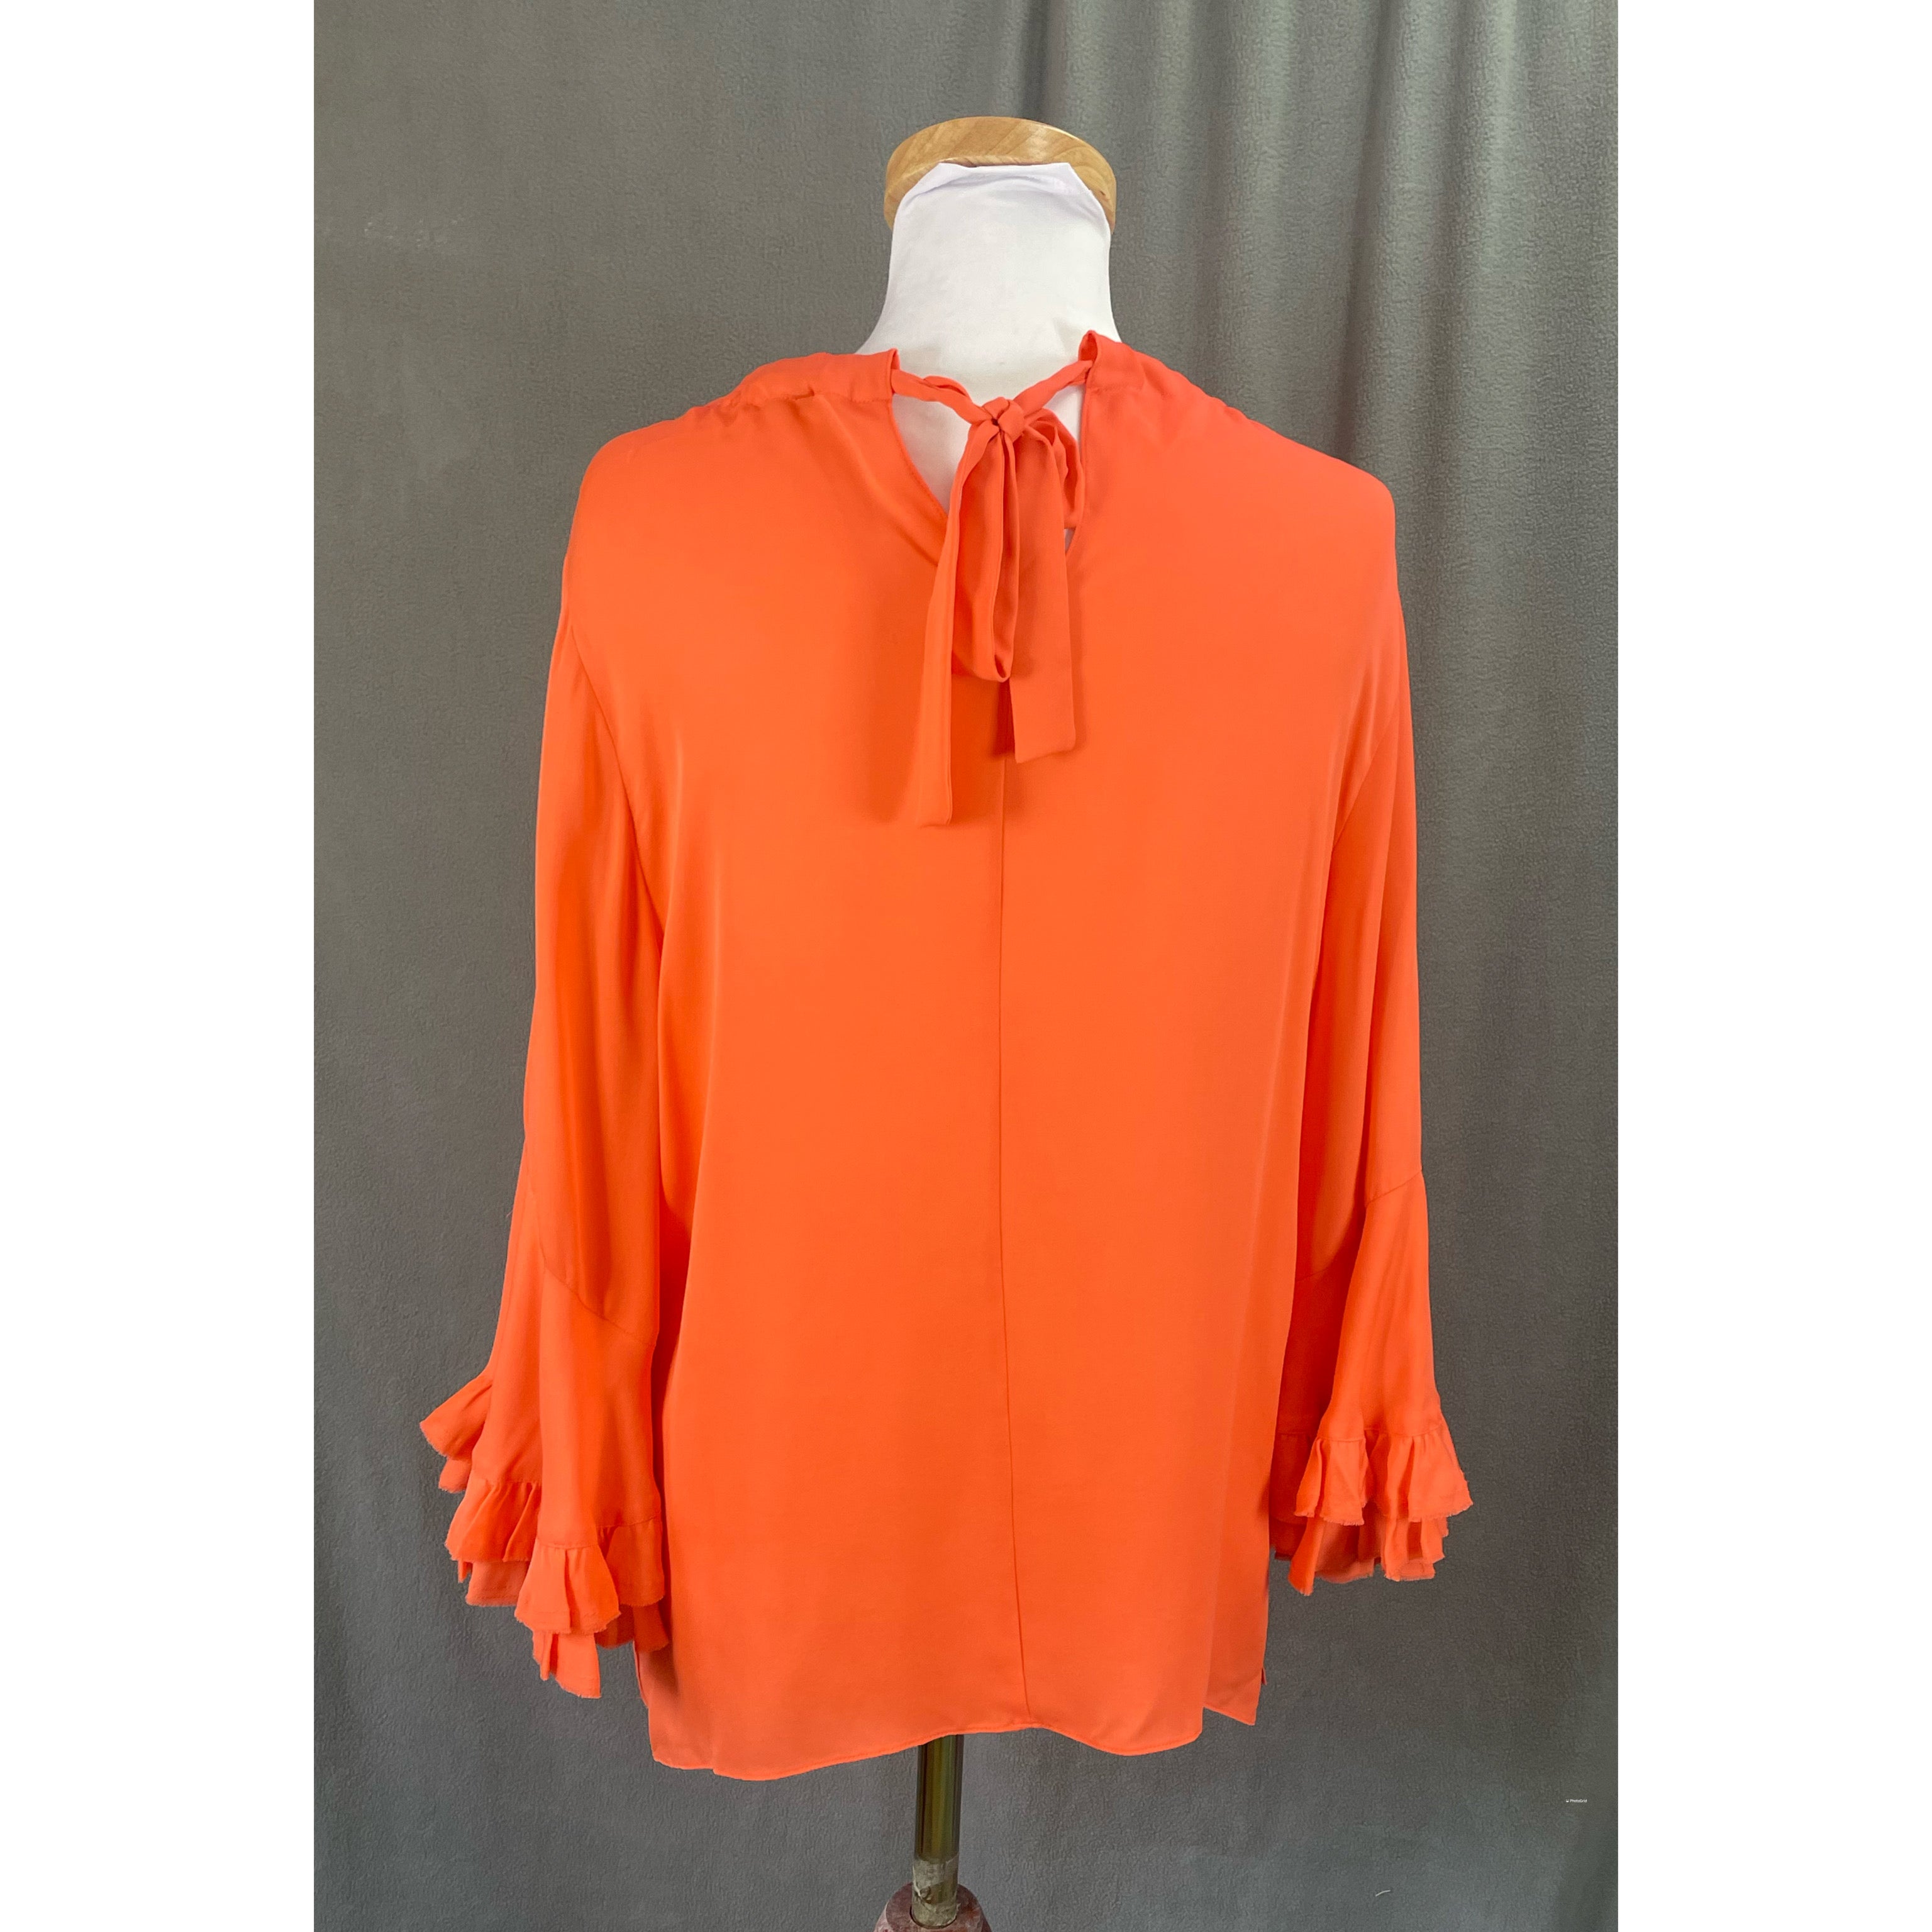 Kobi Halperin coral silk blouse, size M, NEW WITH TAGS!